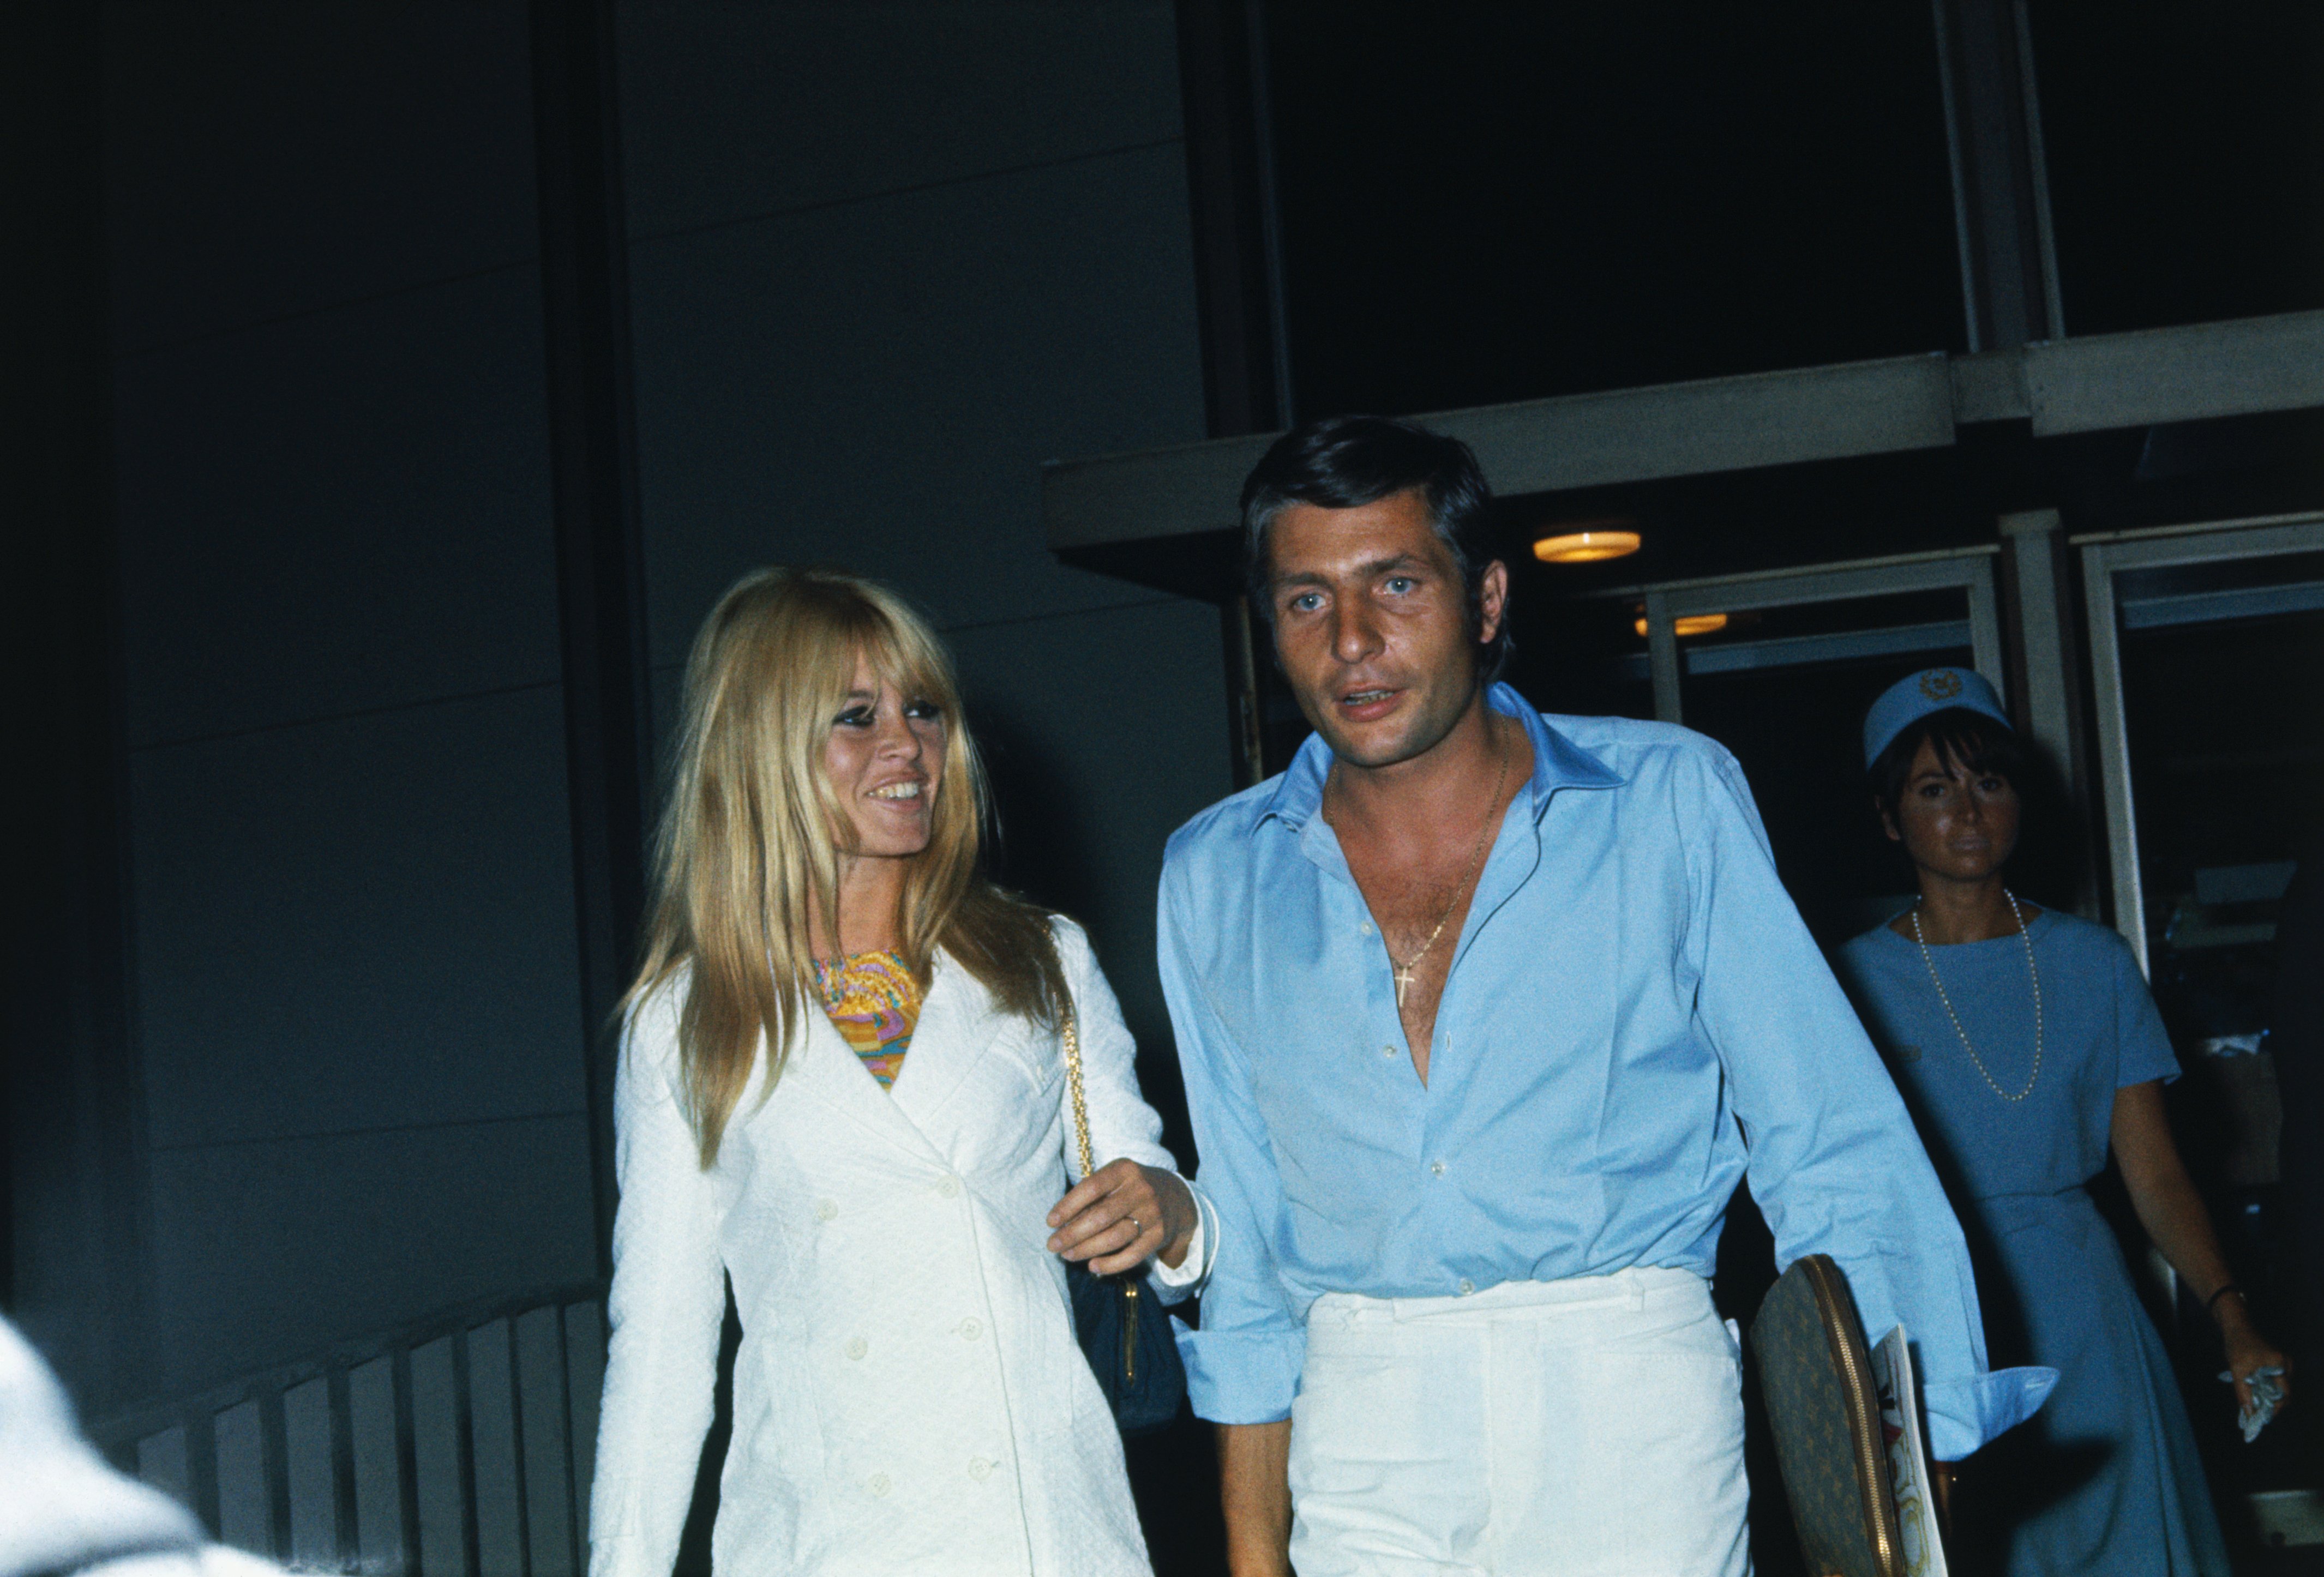 Brigitte Bardot and Gunter Sachs leaving the airport in Los Angeles. | Source: Getty Images